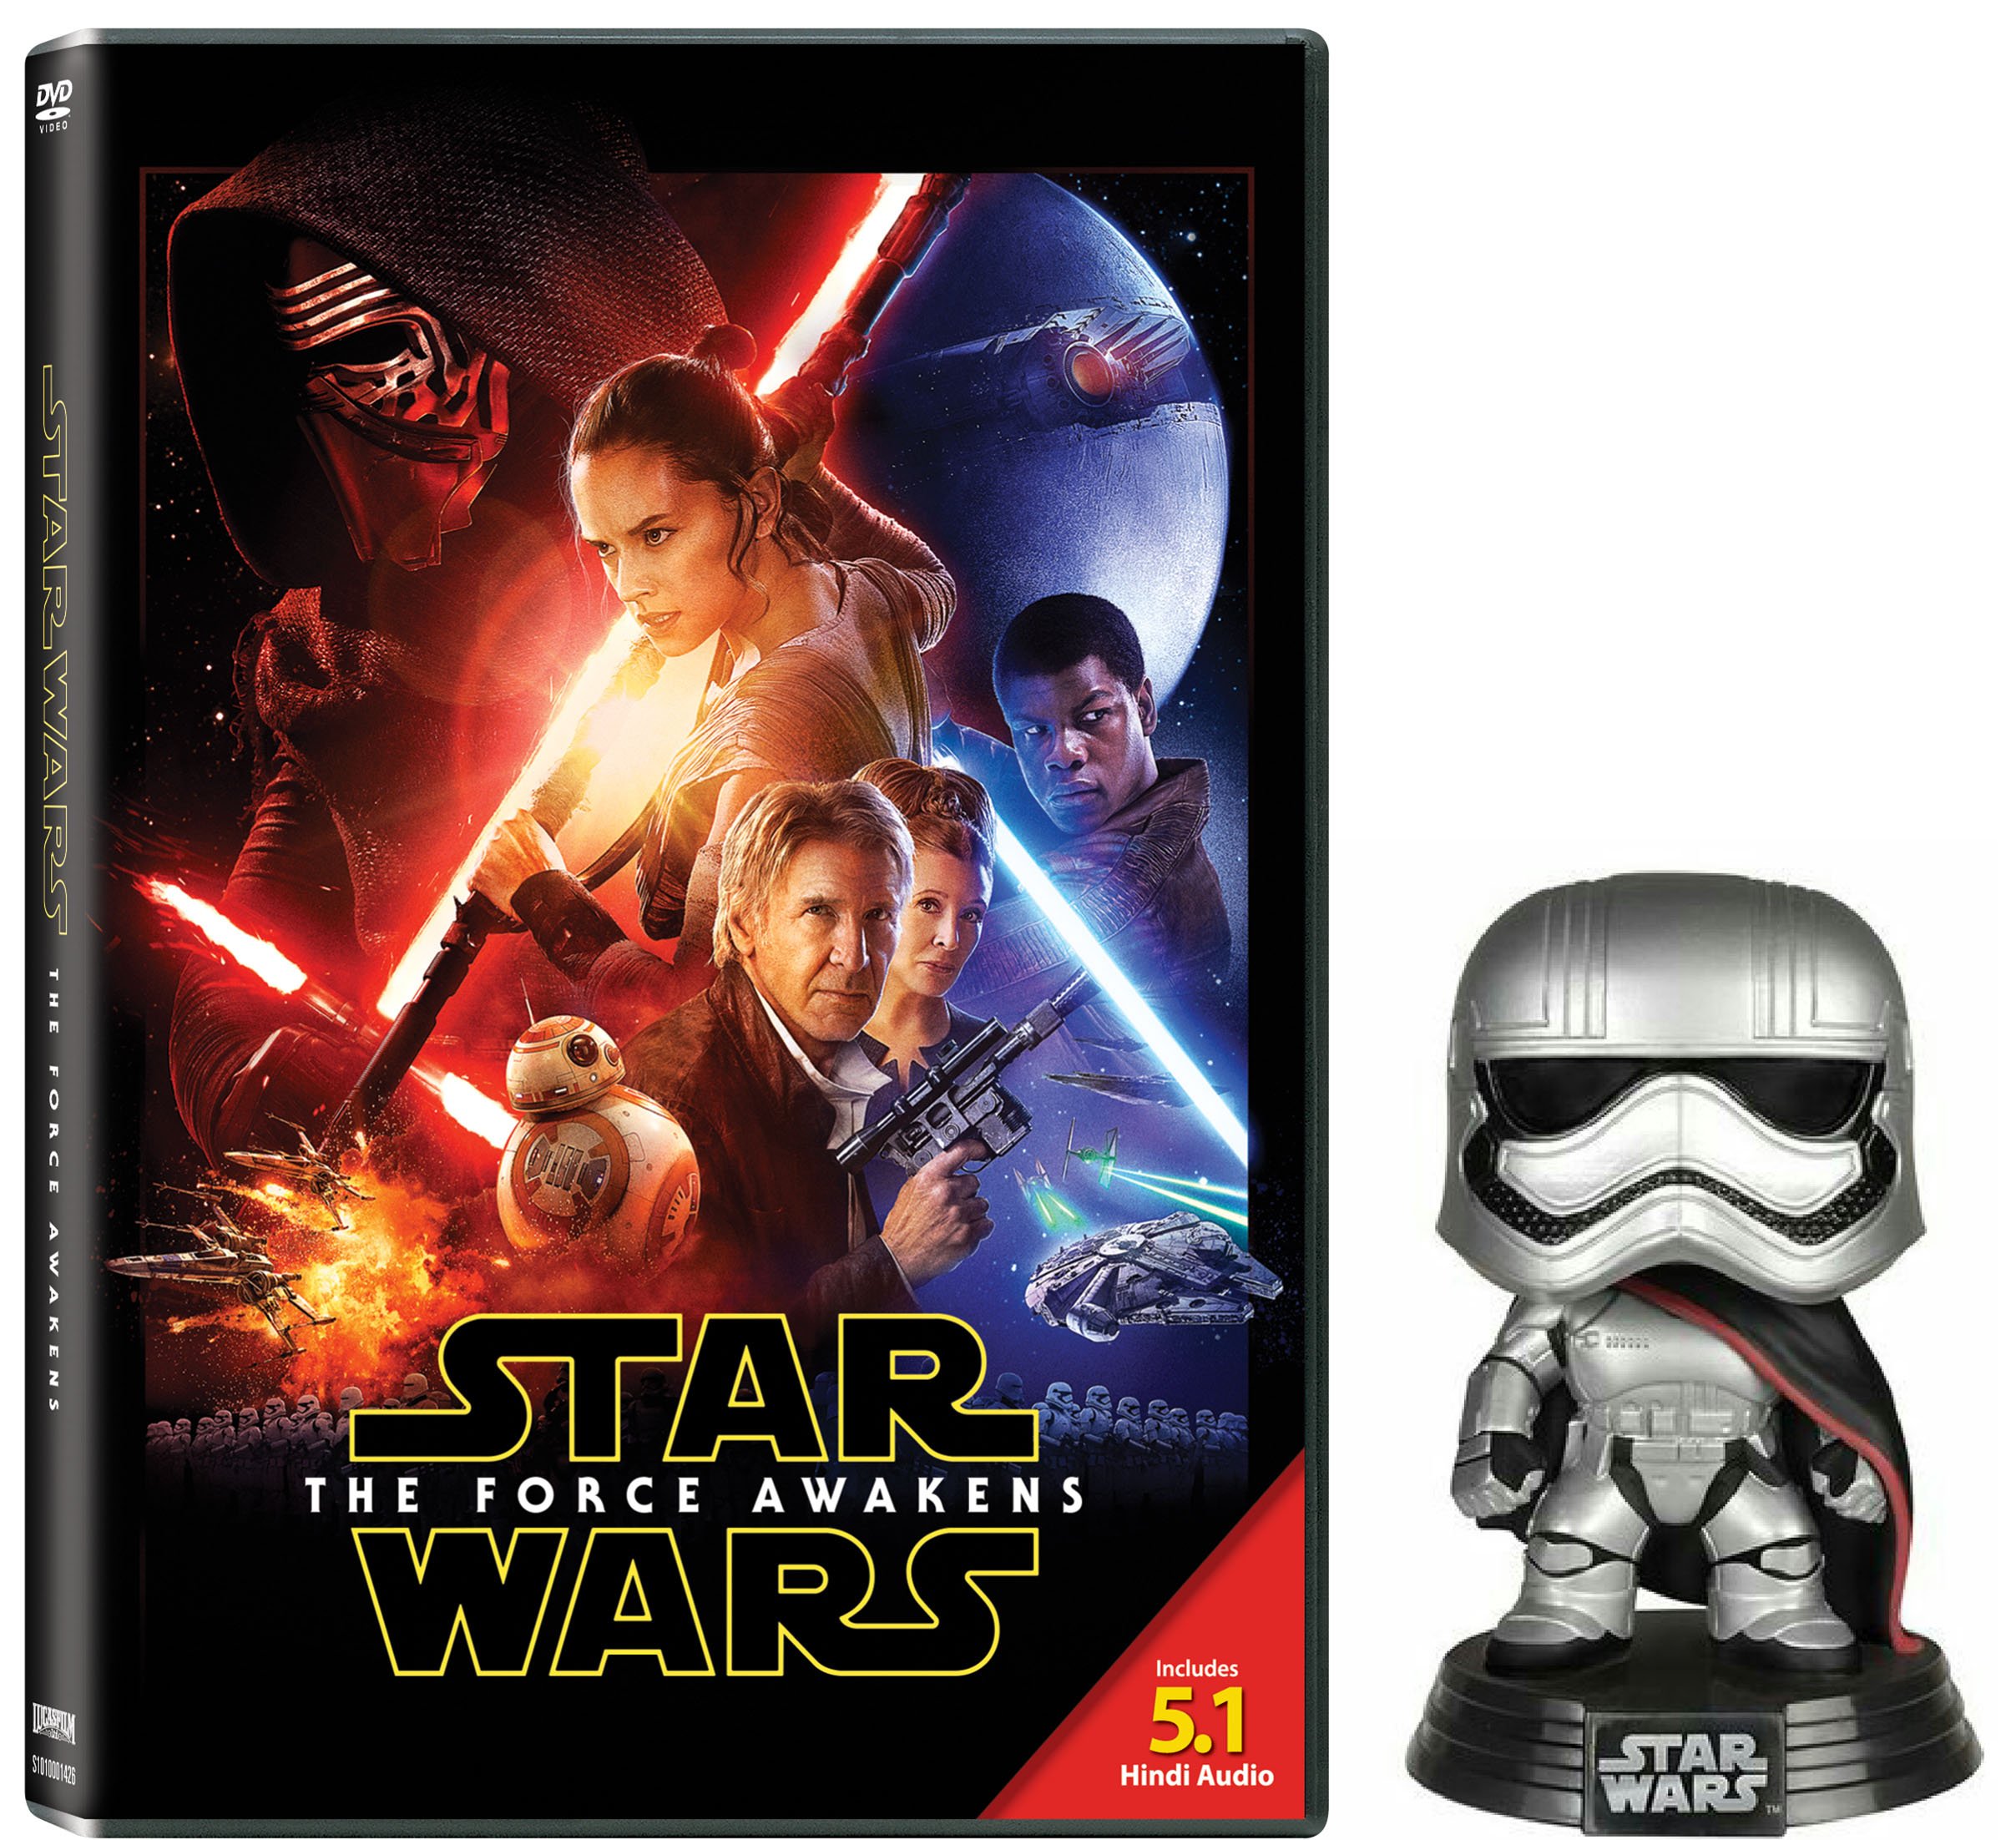 star-wars-the-force-awakens-with-rey-bobble-head-movie-purchase-or-wa